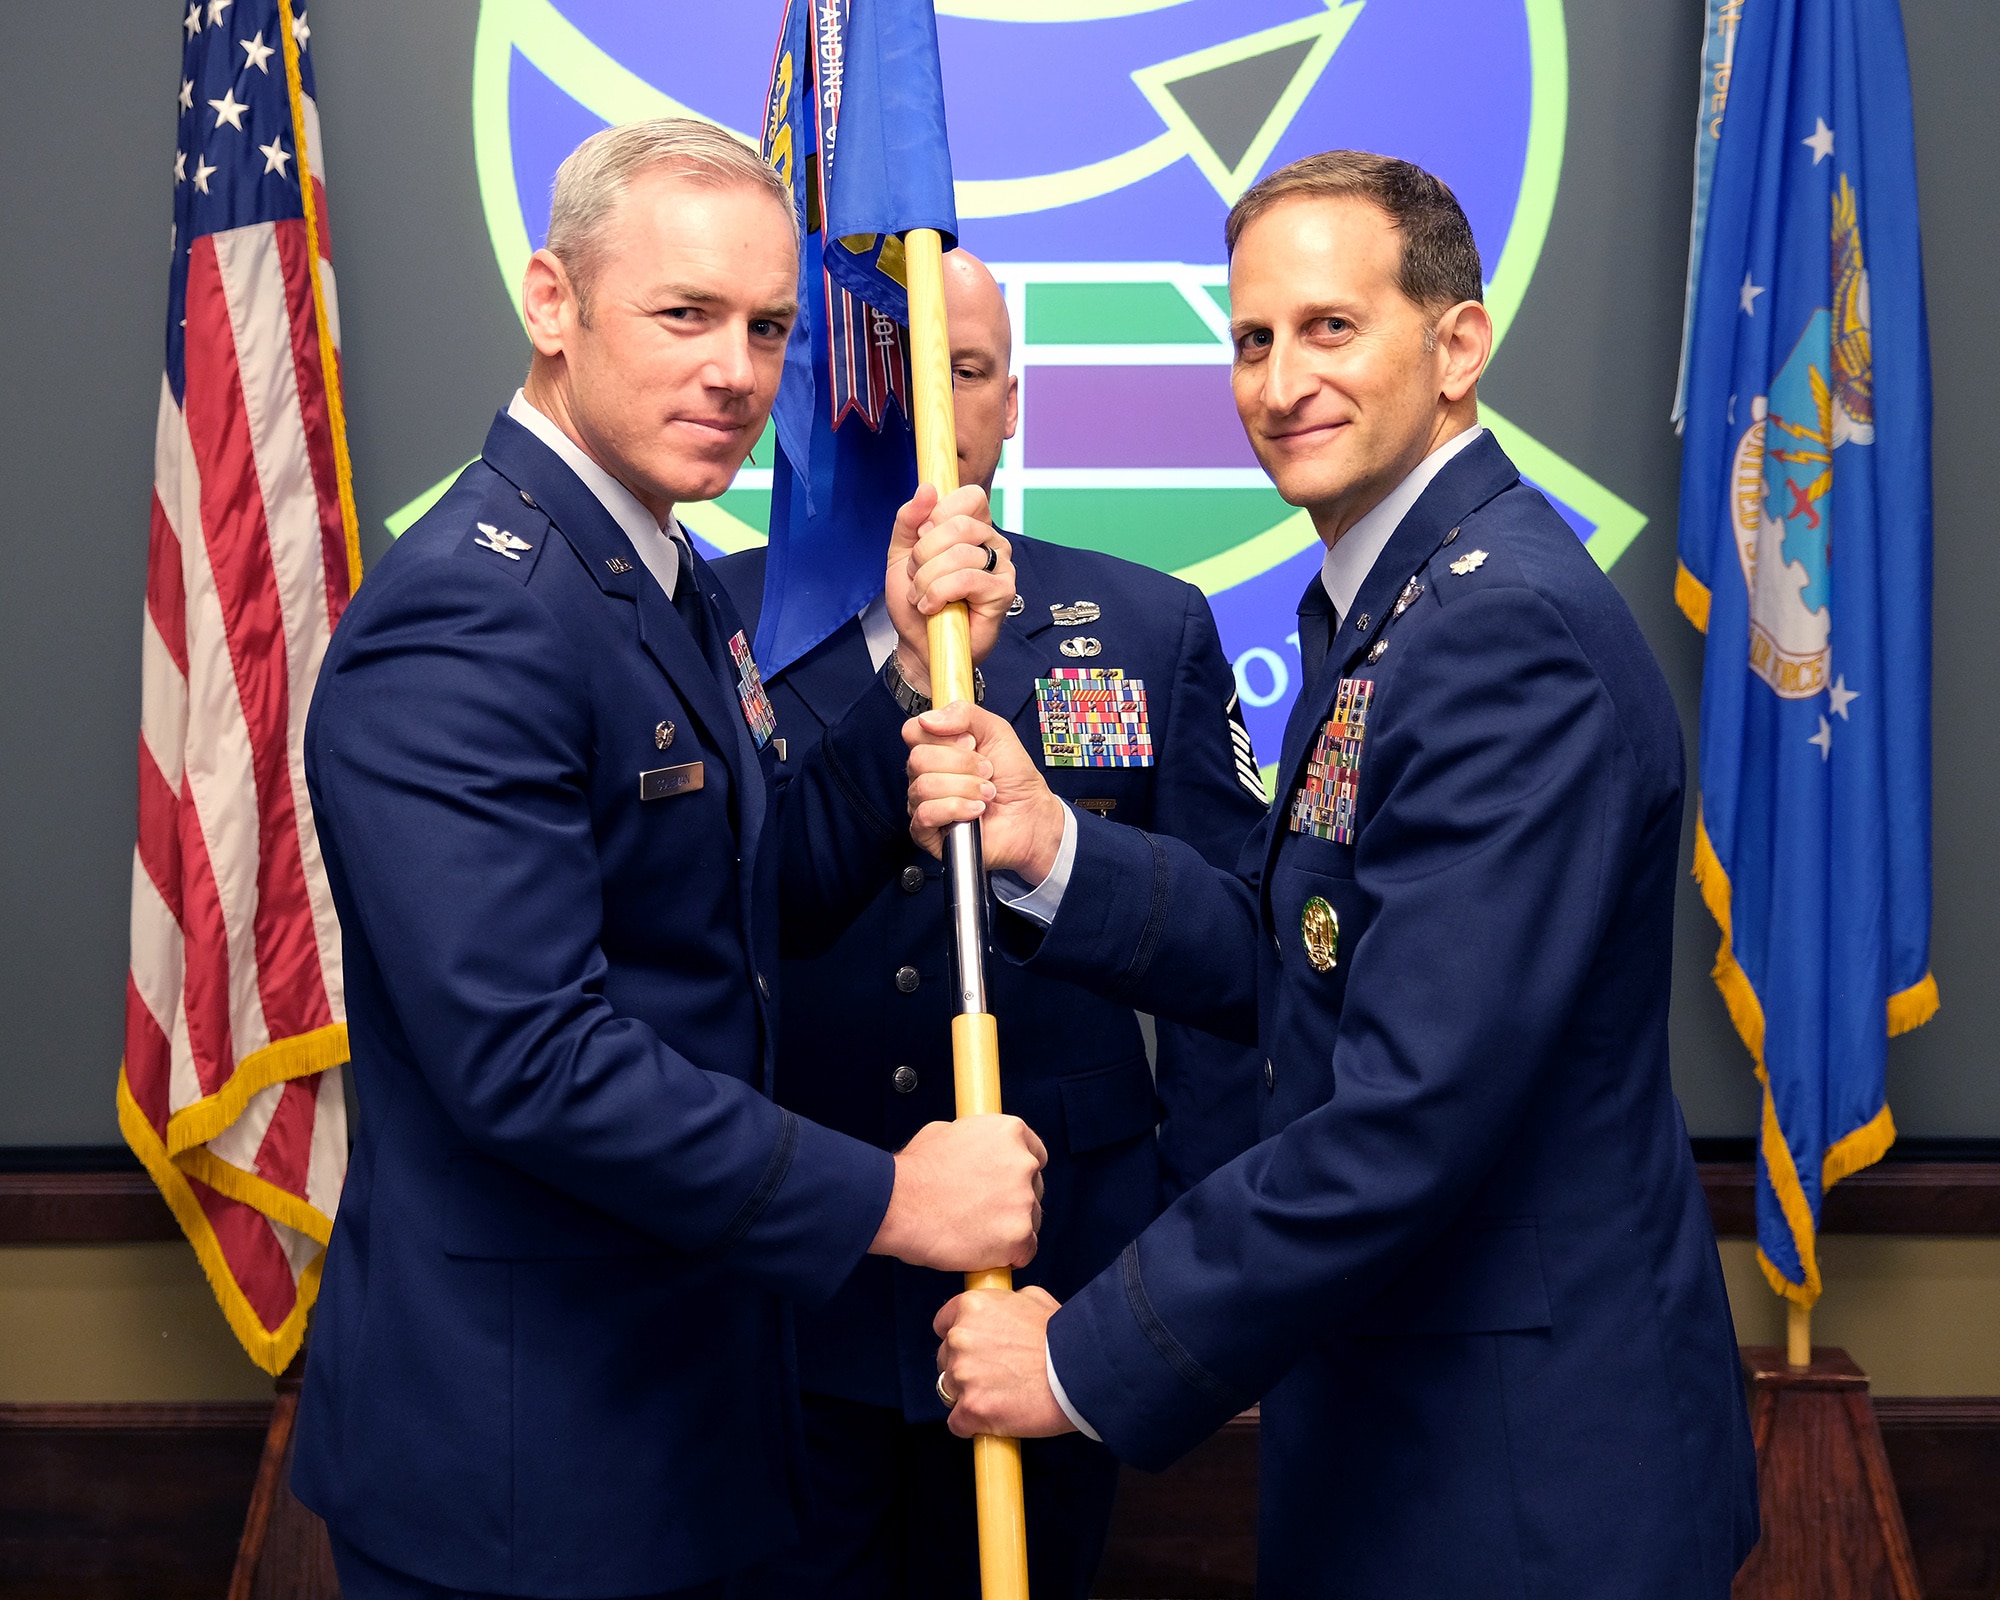 Photo of U.S. Airmen holding unit guidon flag with Airman standing in the background